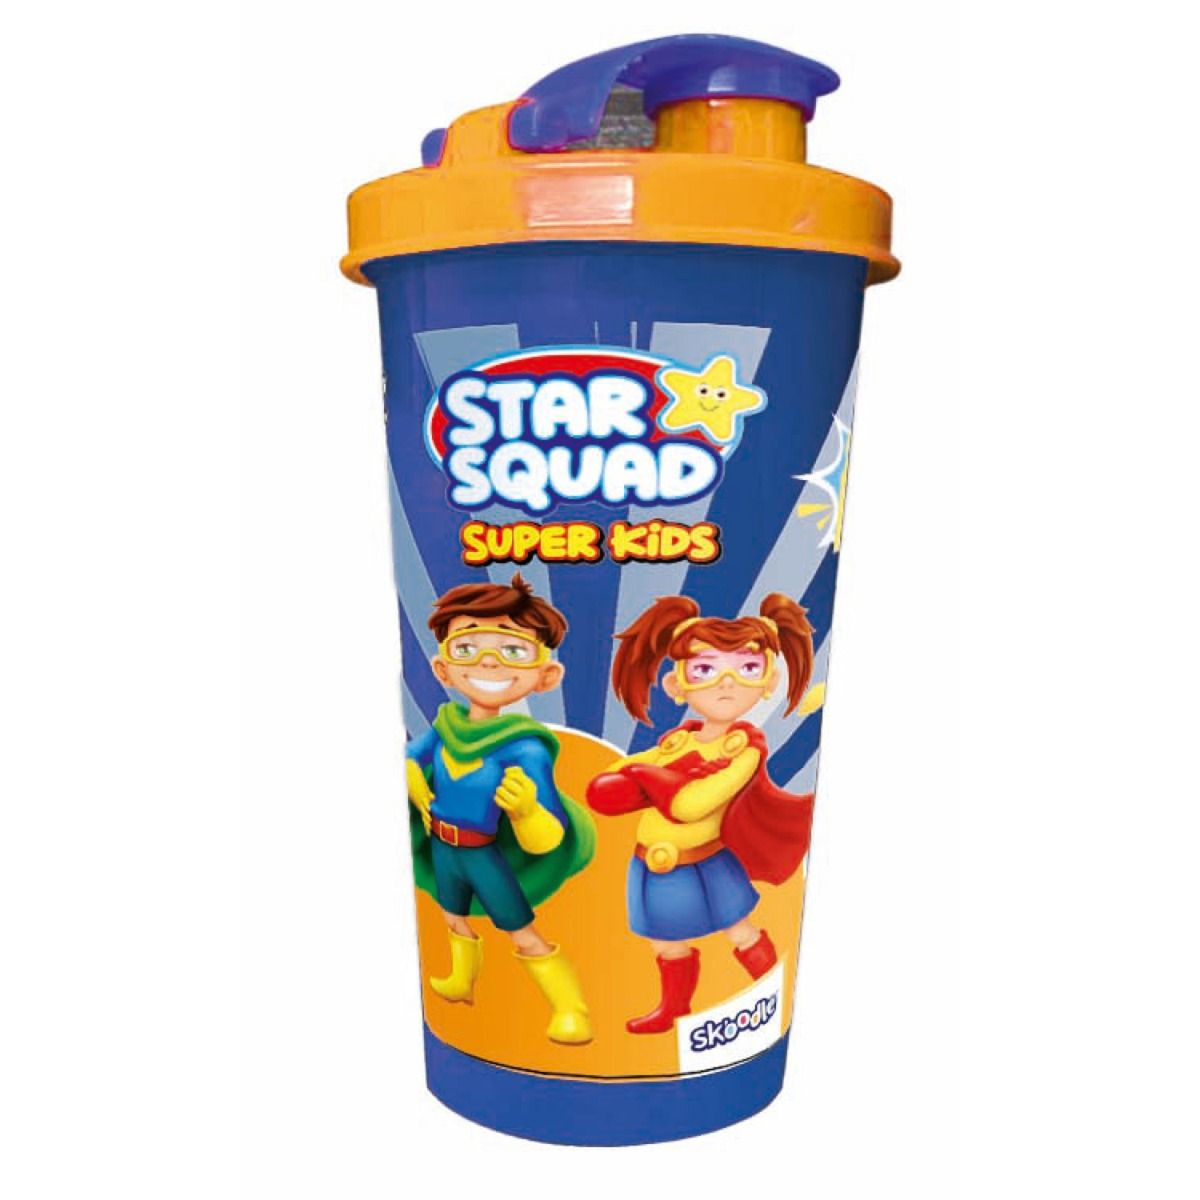 Skoodle Star Squad Clay Dough Pack Gift Set - Super Kids Tumbler Sipper Cup, Cute Water Bottle with Lid, Food Grade Plastic, Leak Proof, BPA Free, 300 ml with Surprise gifts inside.